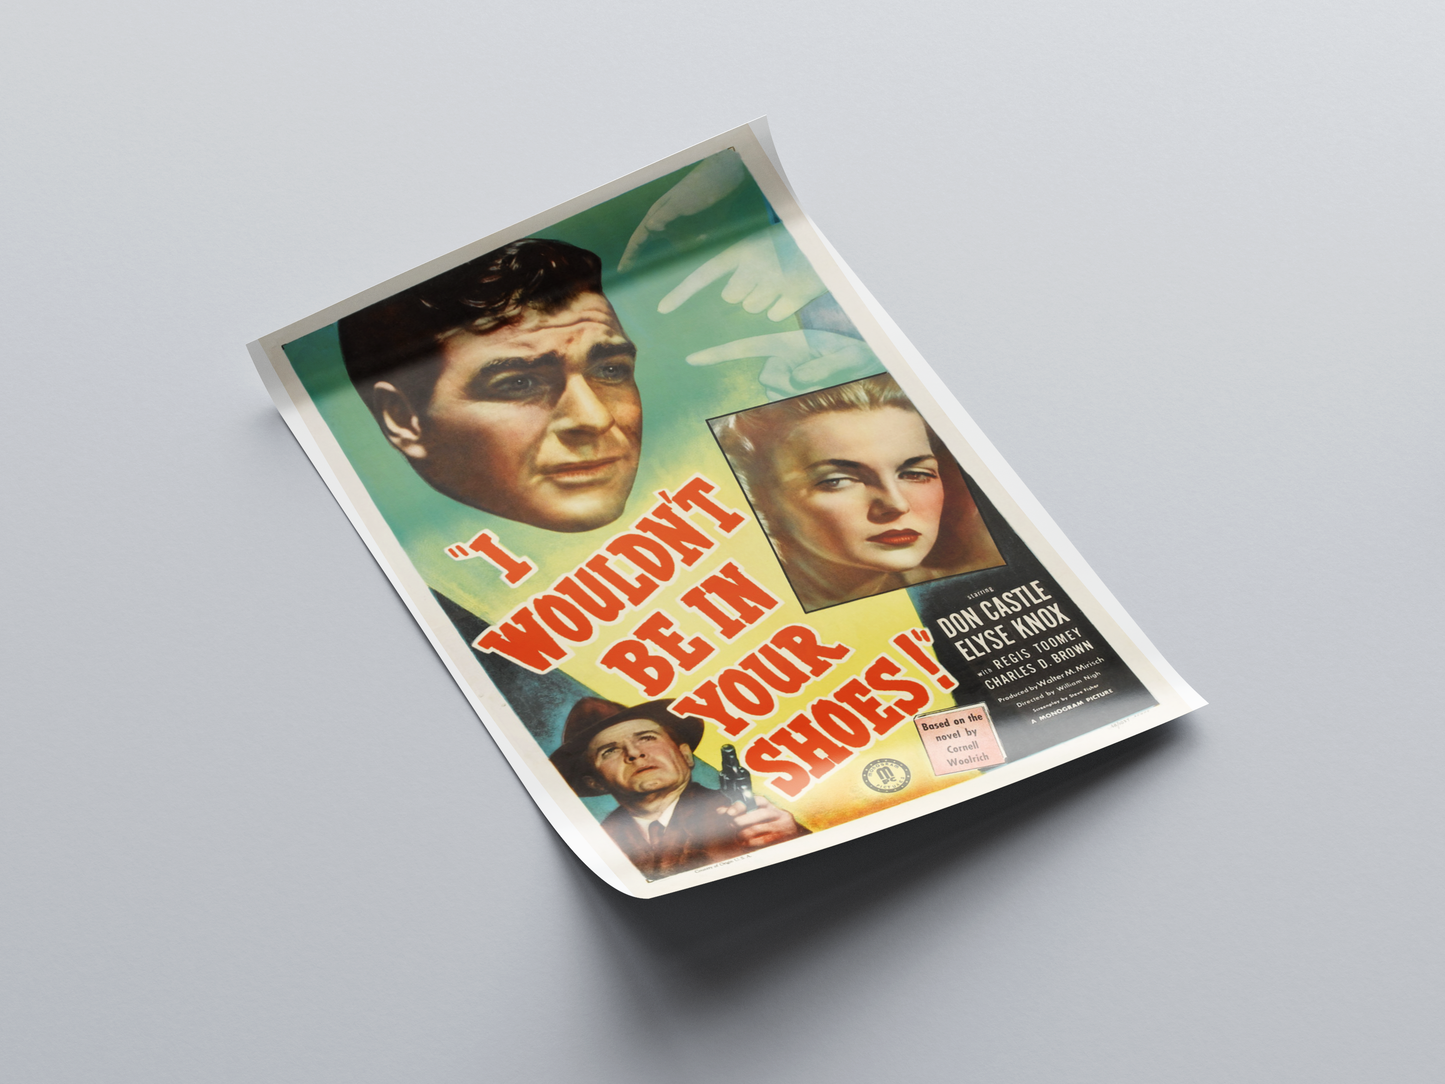 I Wouldn't Be in Your Shoes (1948) Movie Poster displayed in interior setting